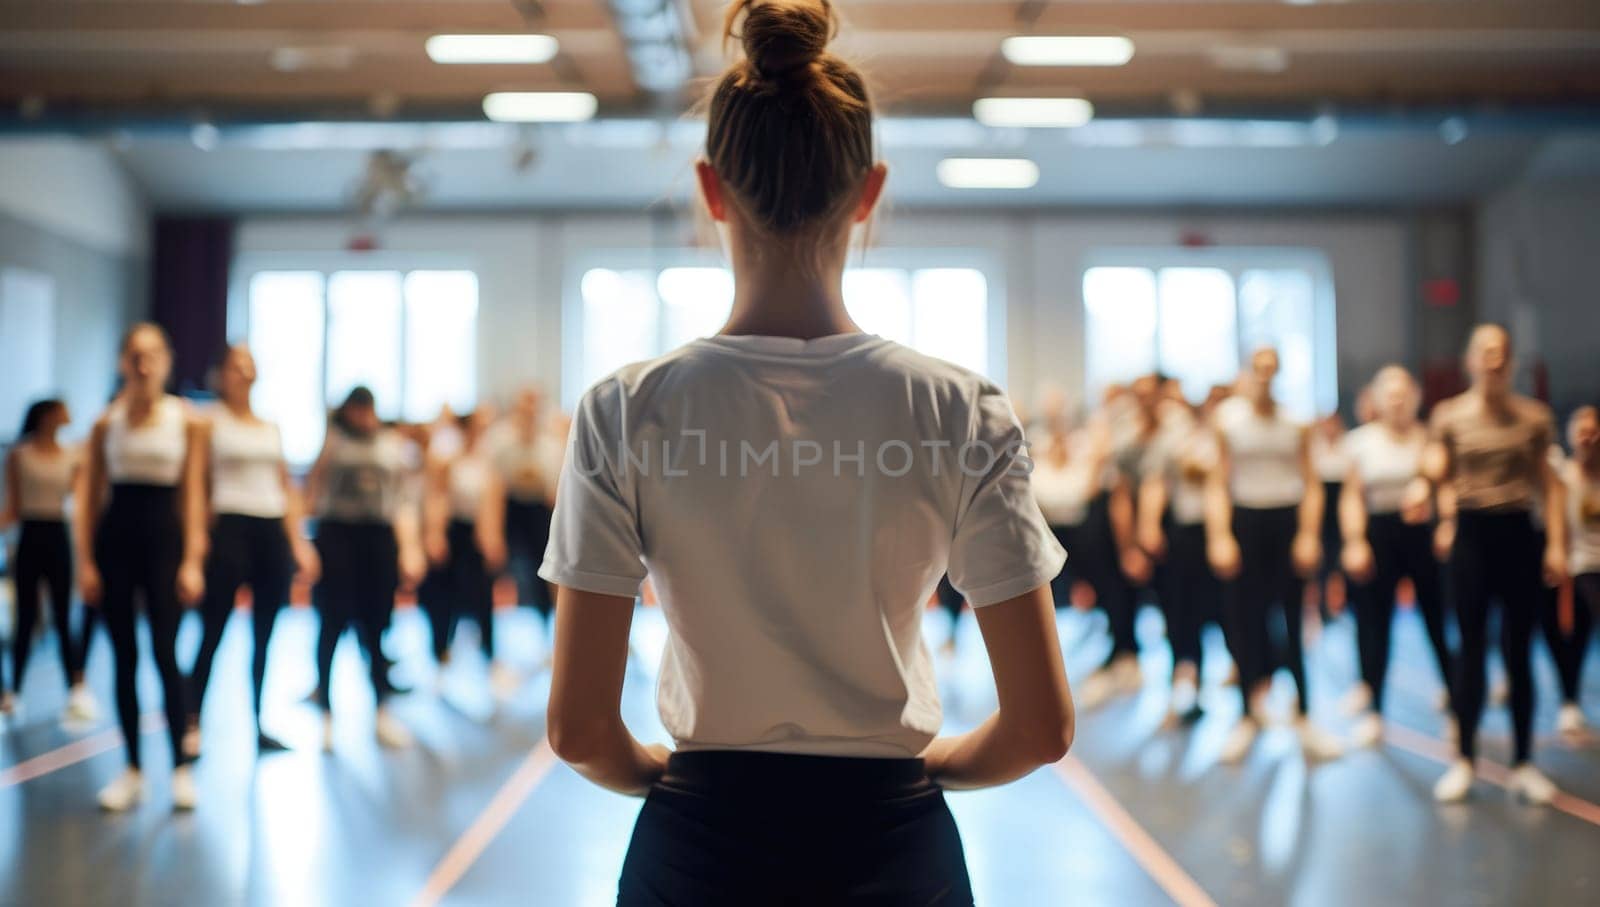 Dance instructor leading group in studio